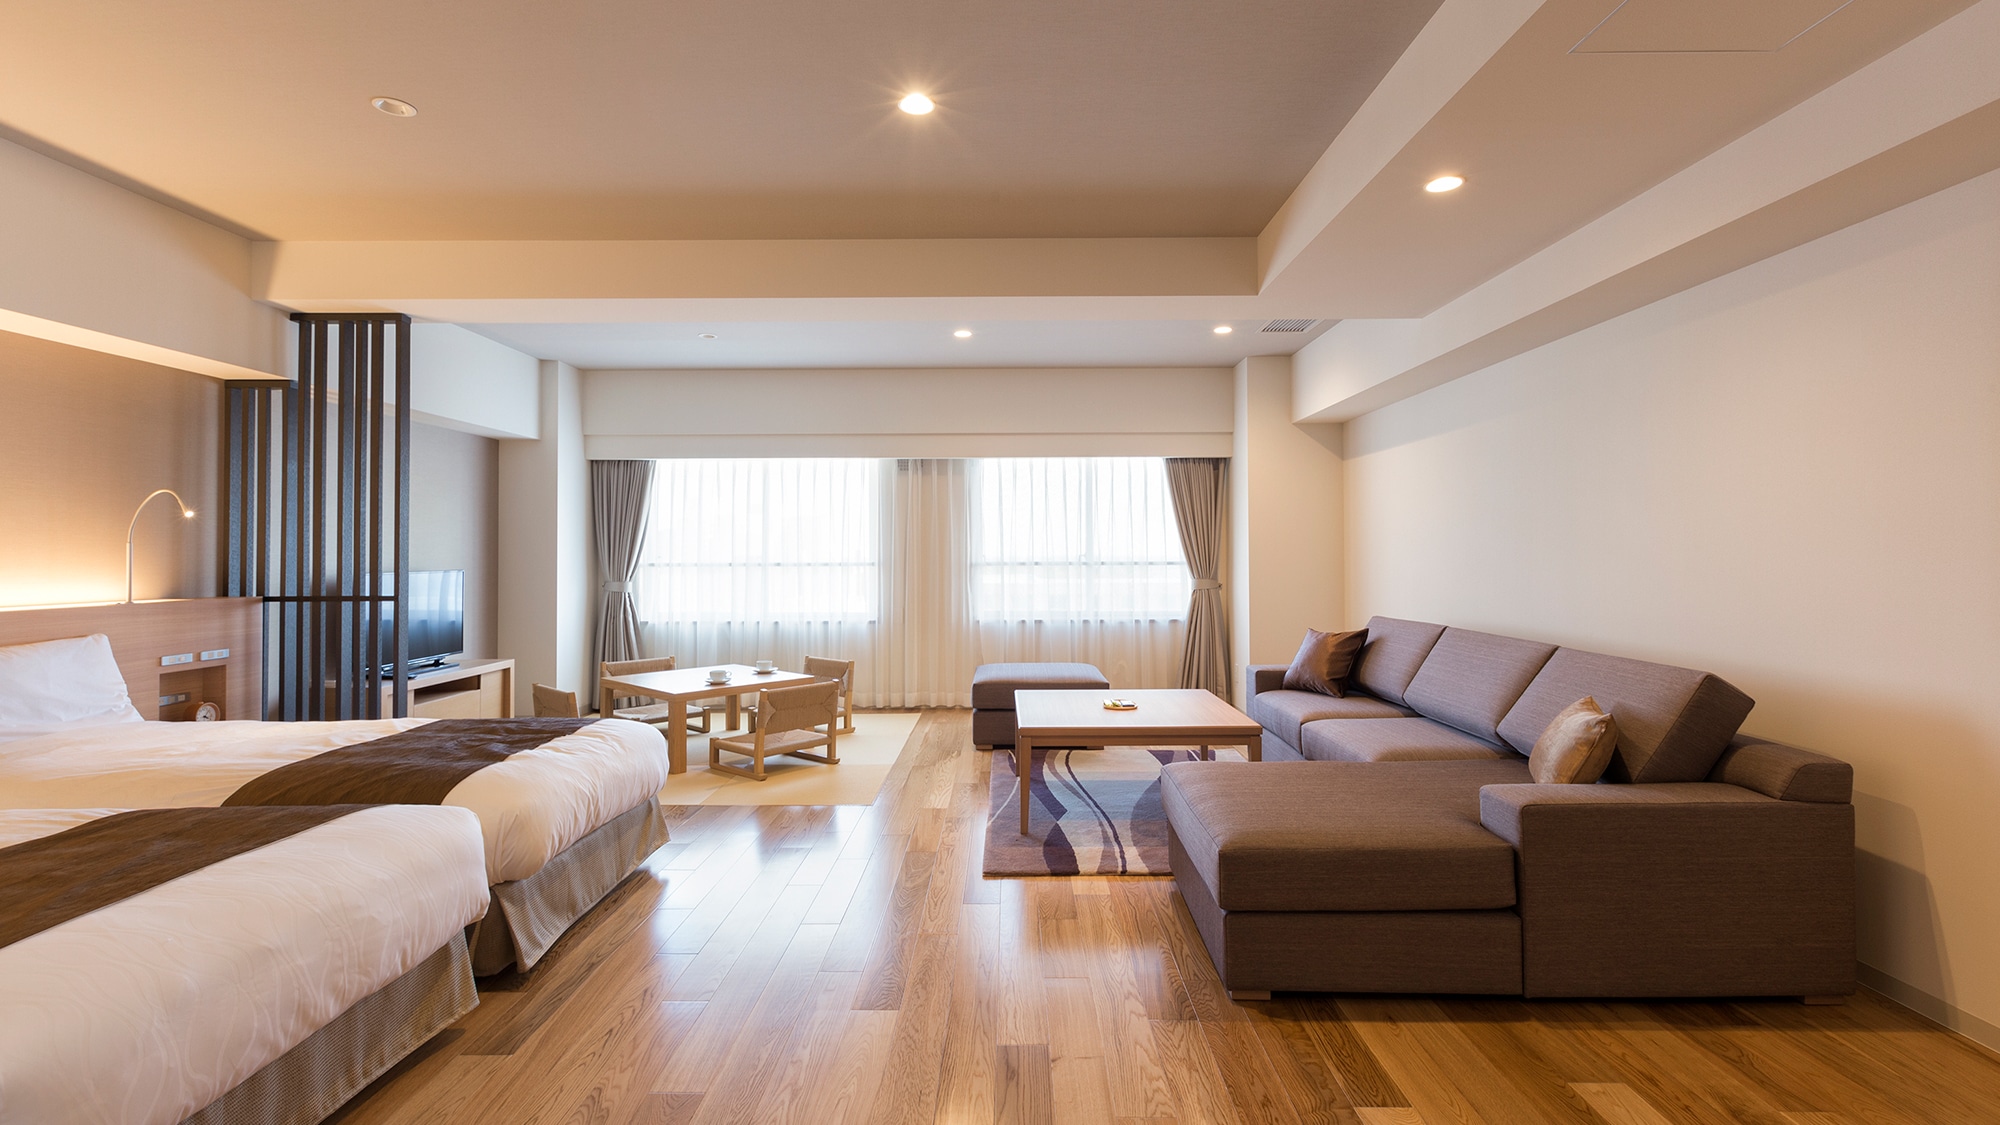 [Heisei Modern Japanese and Western Room] This is an open room with no partitions and light shines through the entire room through large windows.